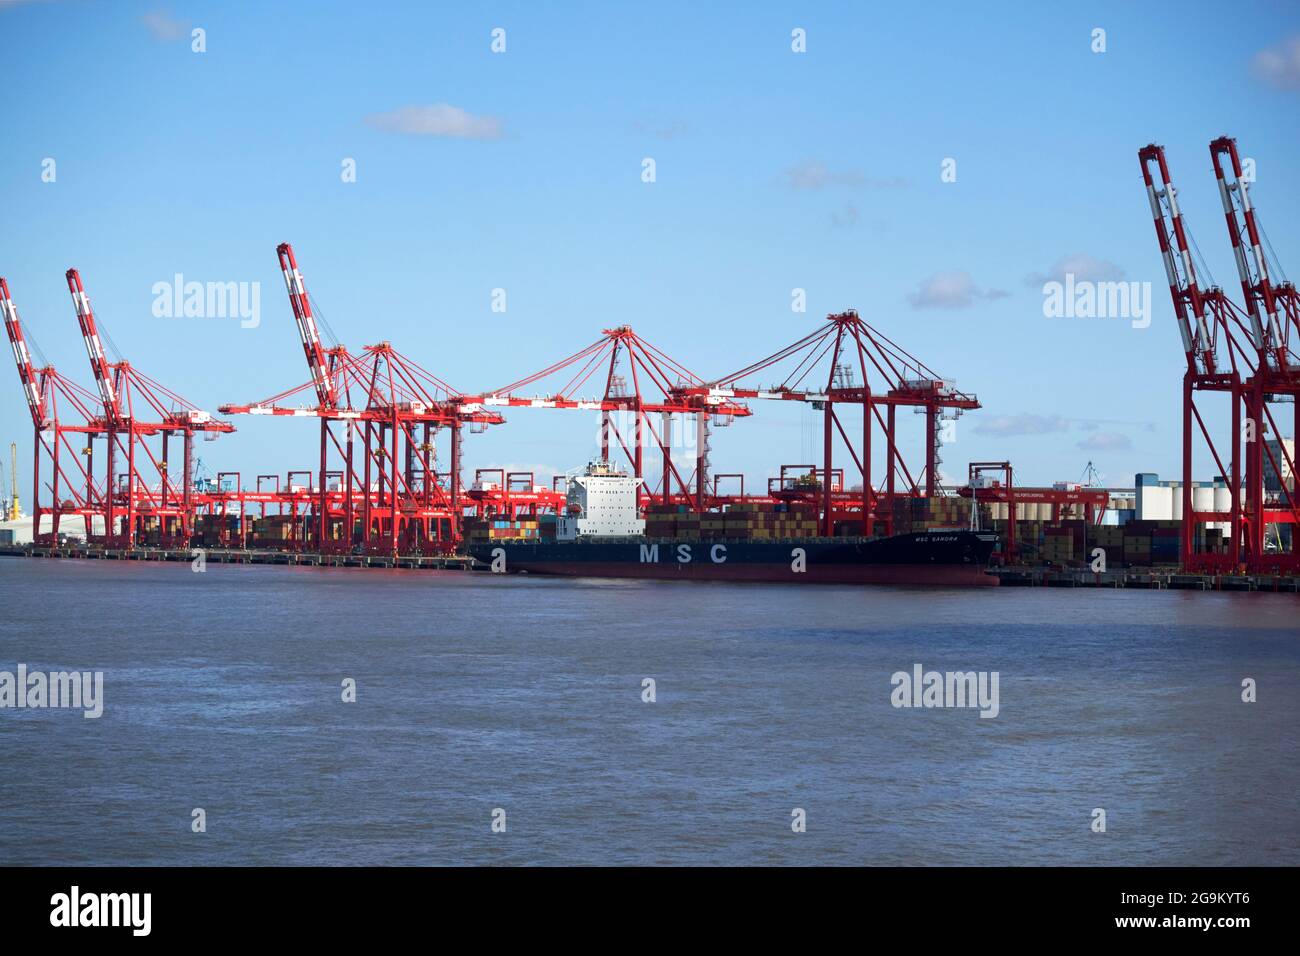 cranes at liverpool 2 container terminal freeport loading unloading msc sandra container ship liverpool england uk Stock Photo